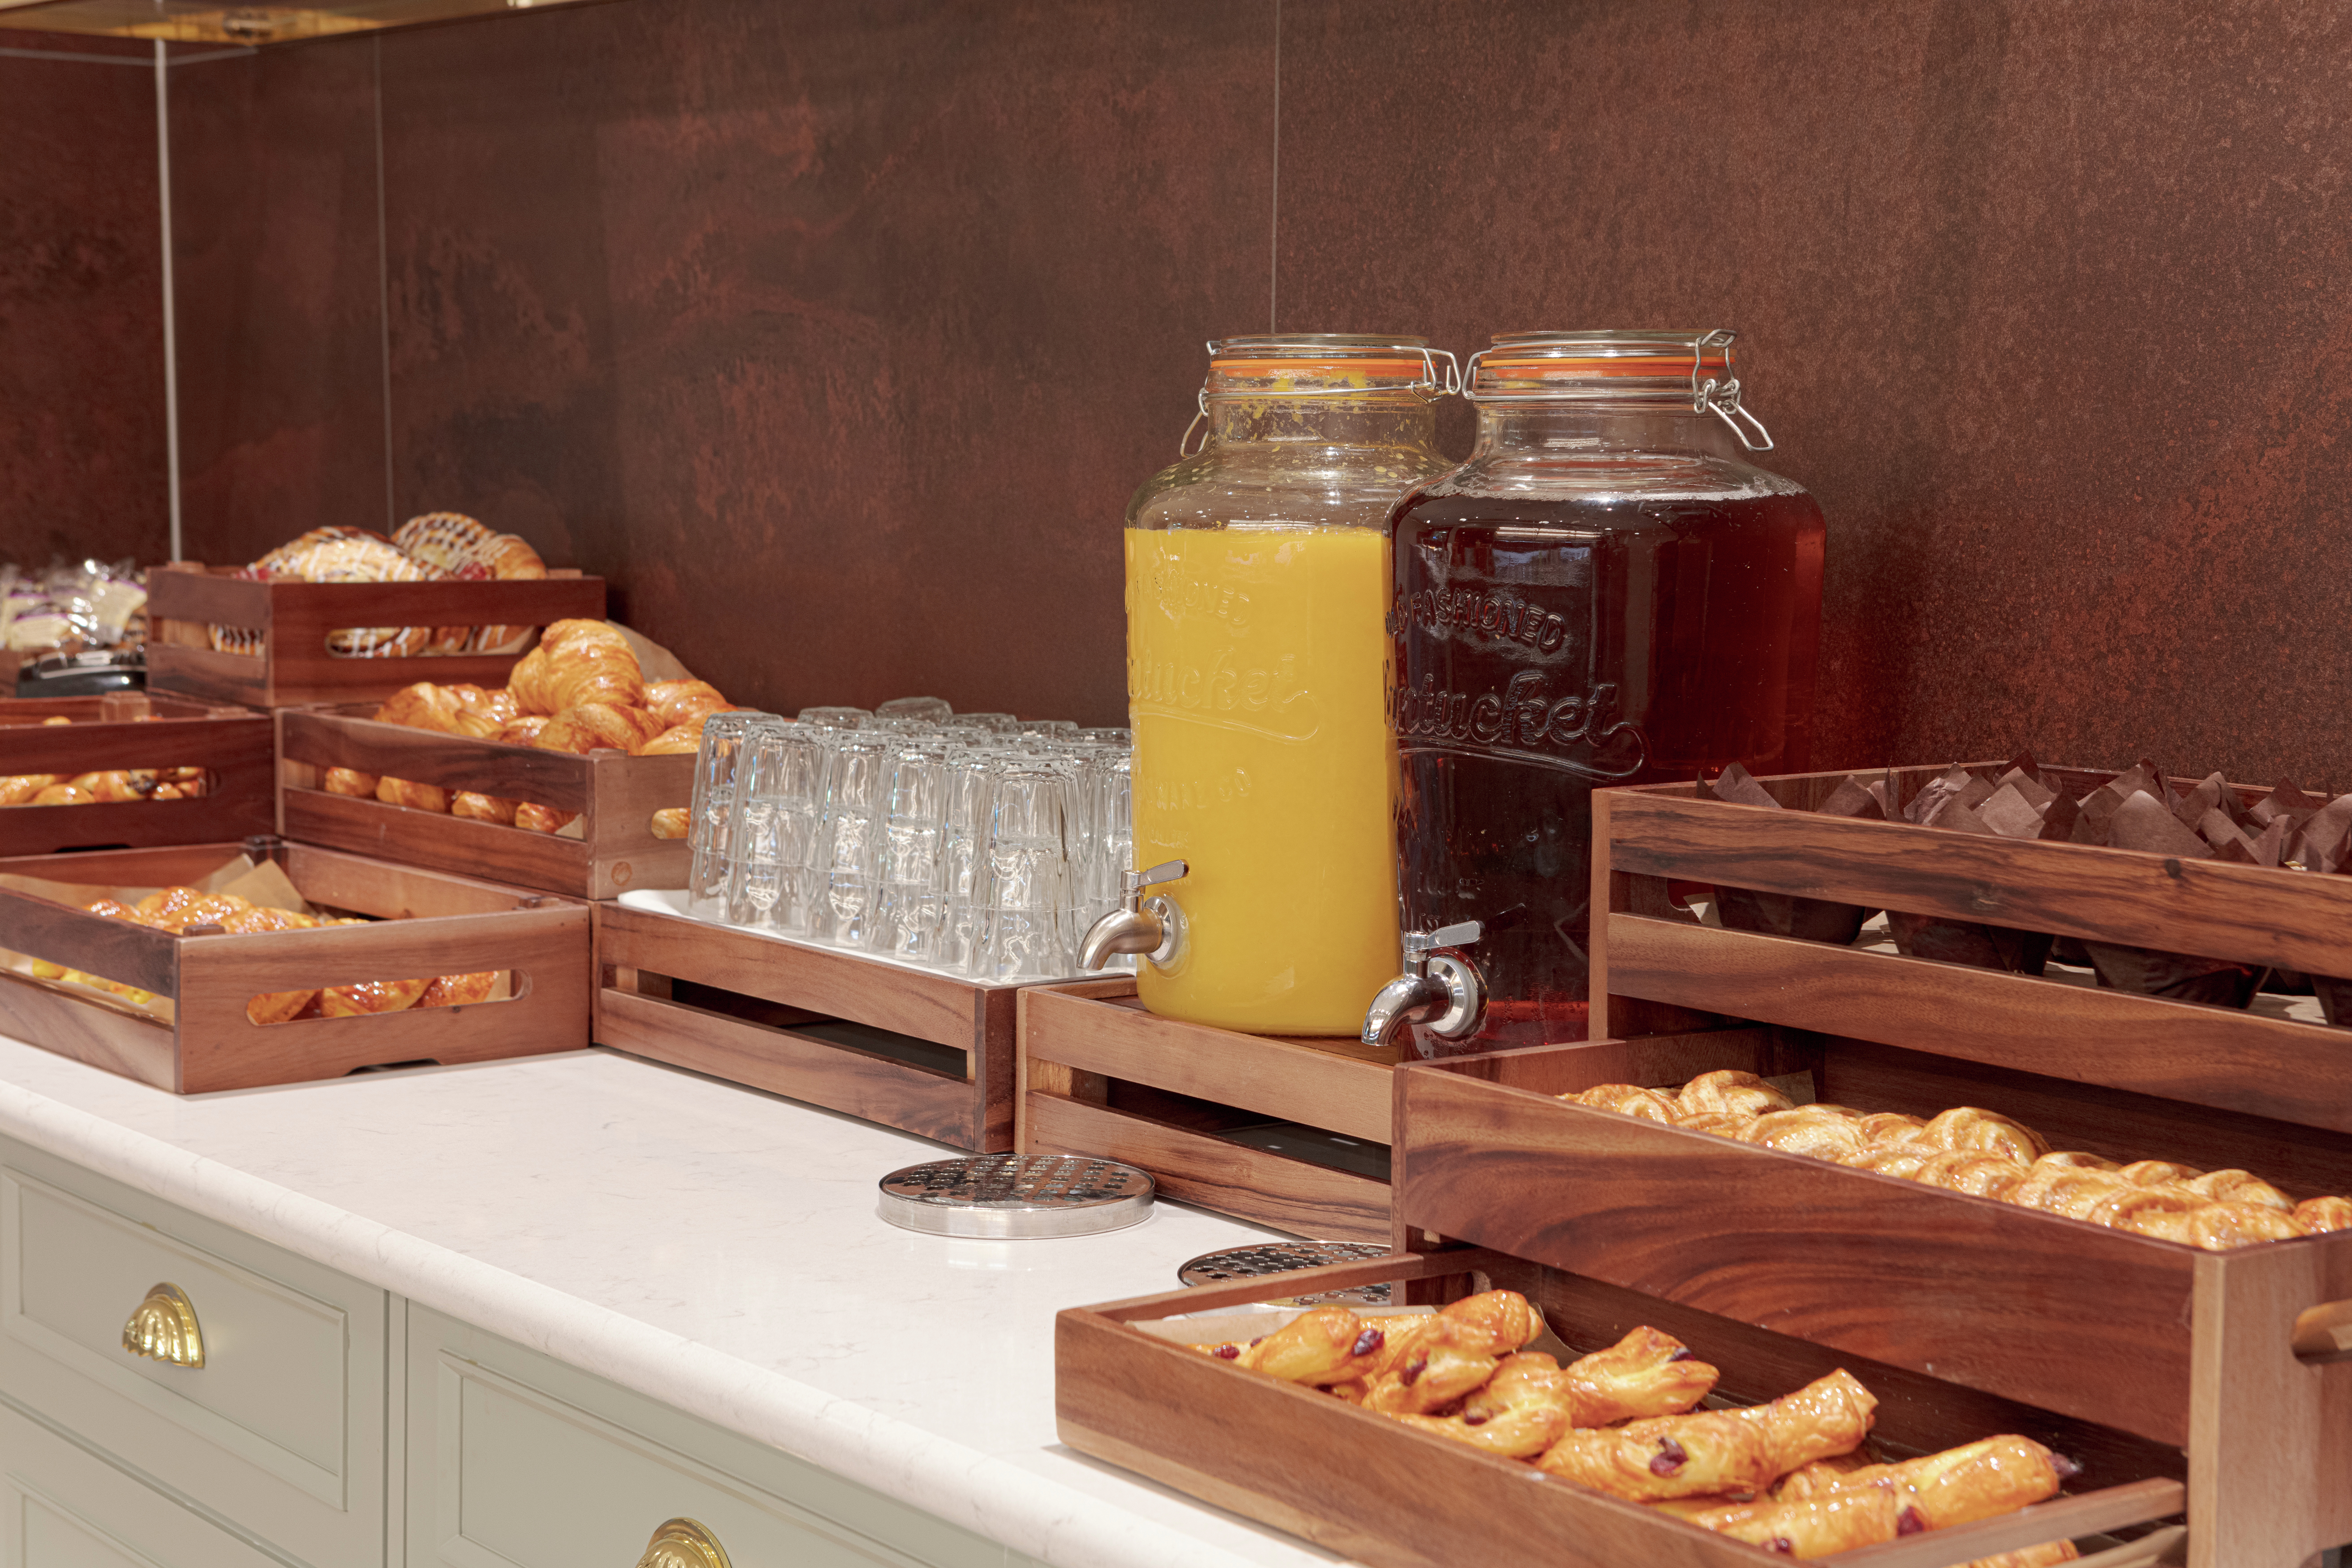 Pastries and Drinks in Breakfast Area